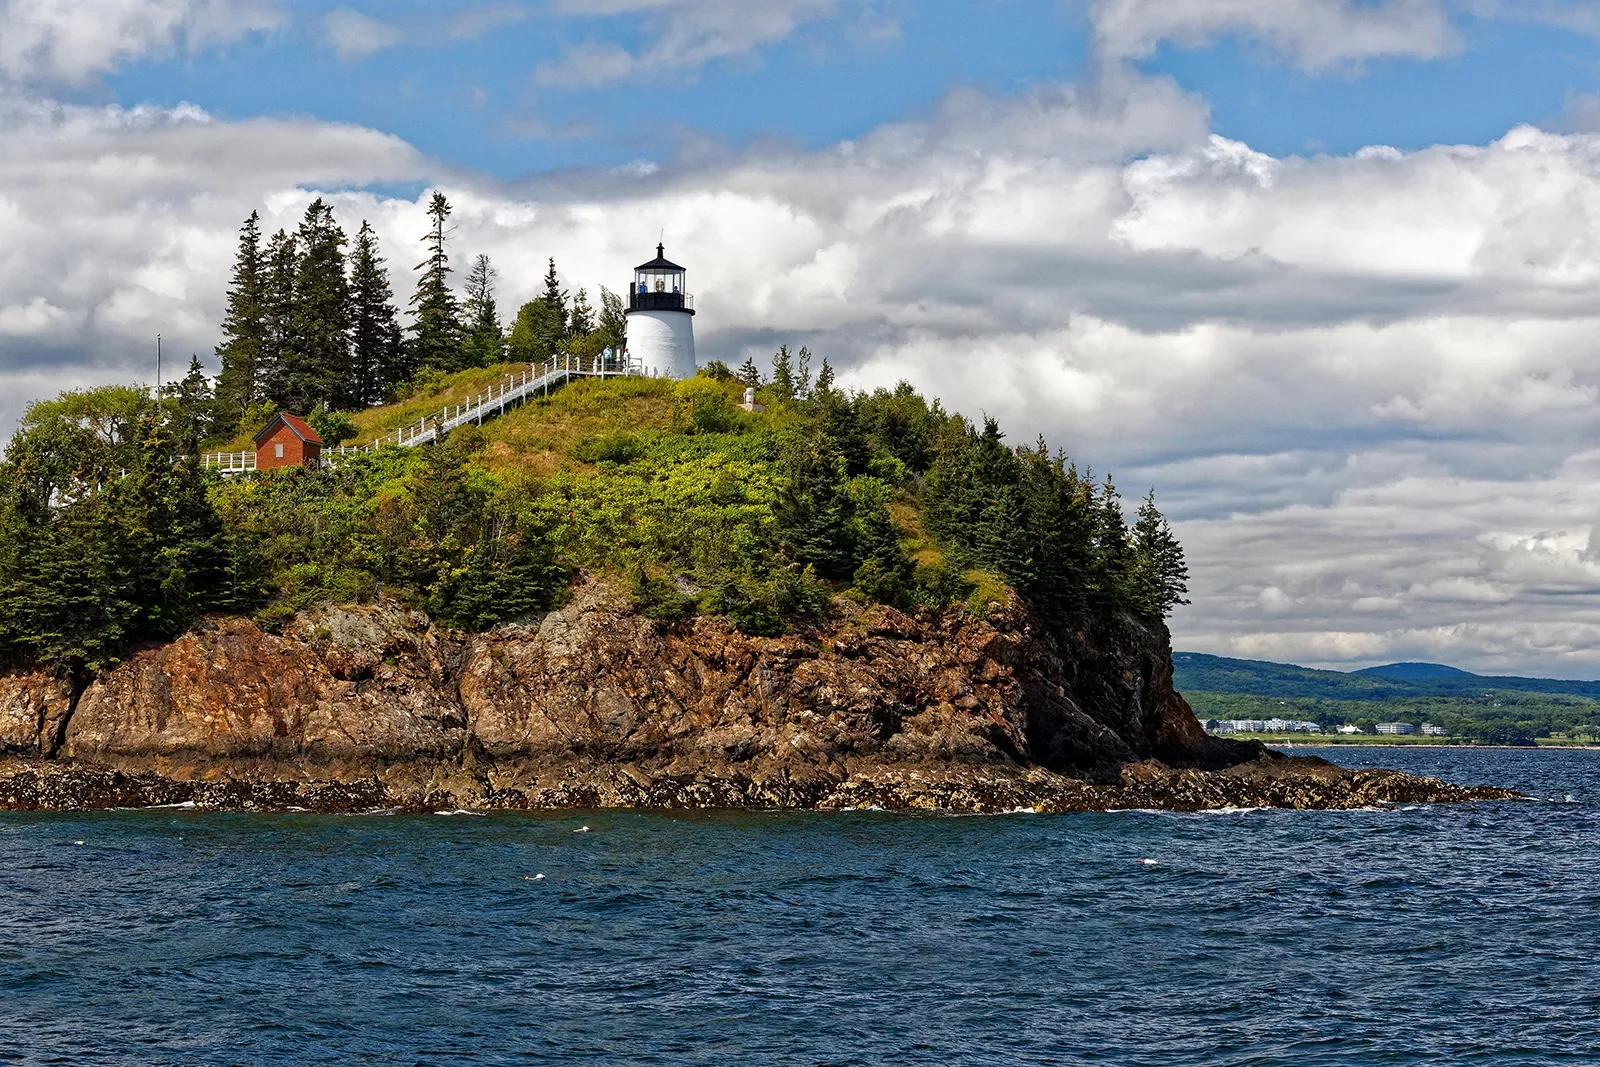 Wide shot of small island, white lighthouse and small red building on it.